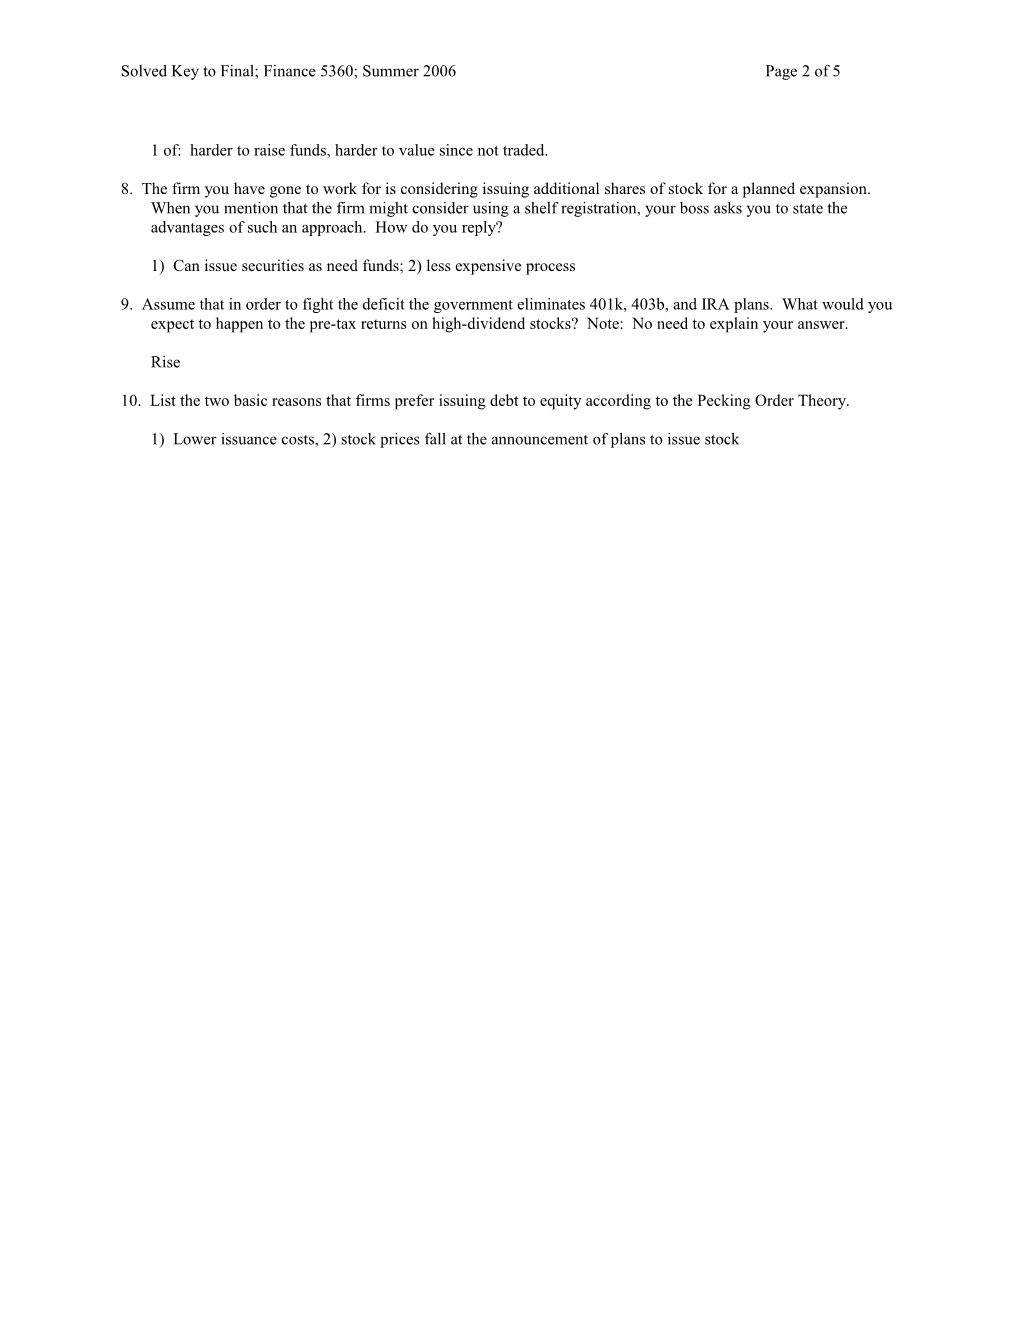 Solved Key to Final; Finance 5360; Summer 2006 Page 4 of 5